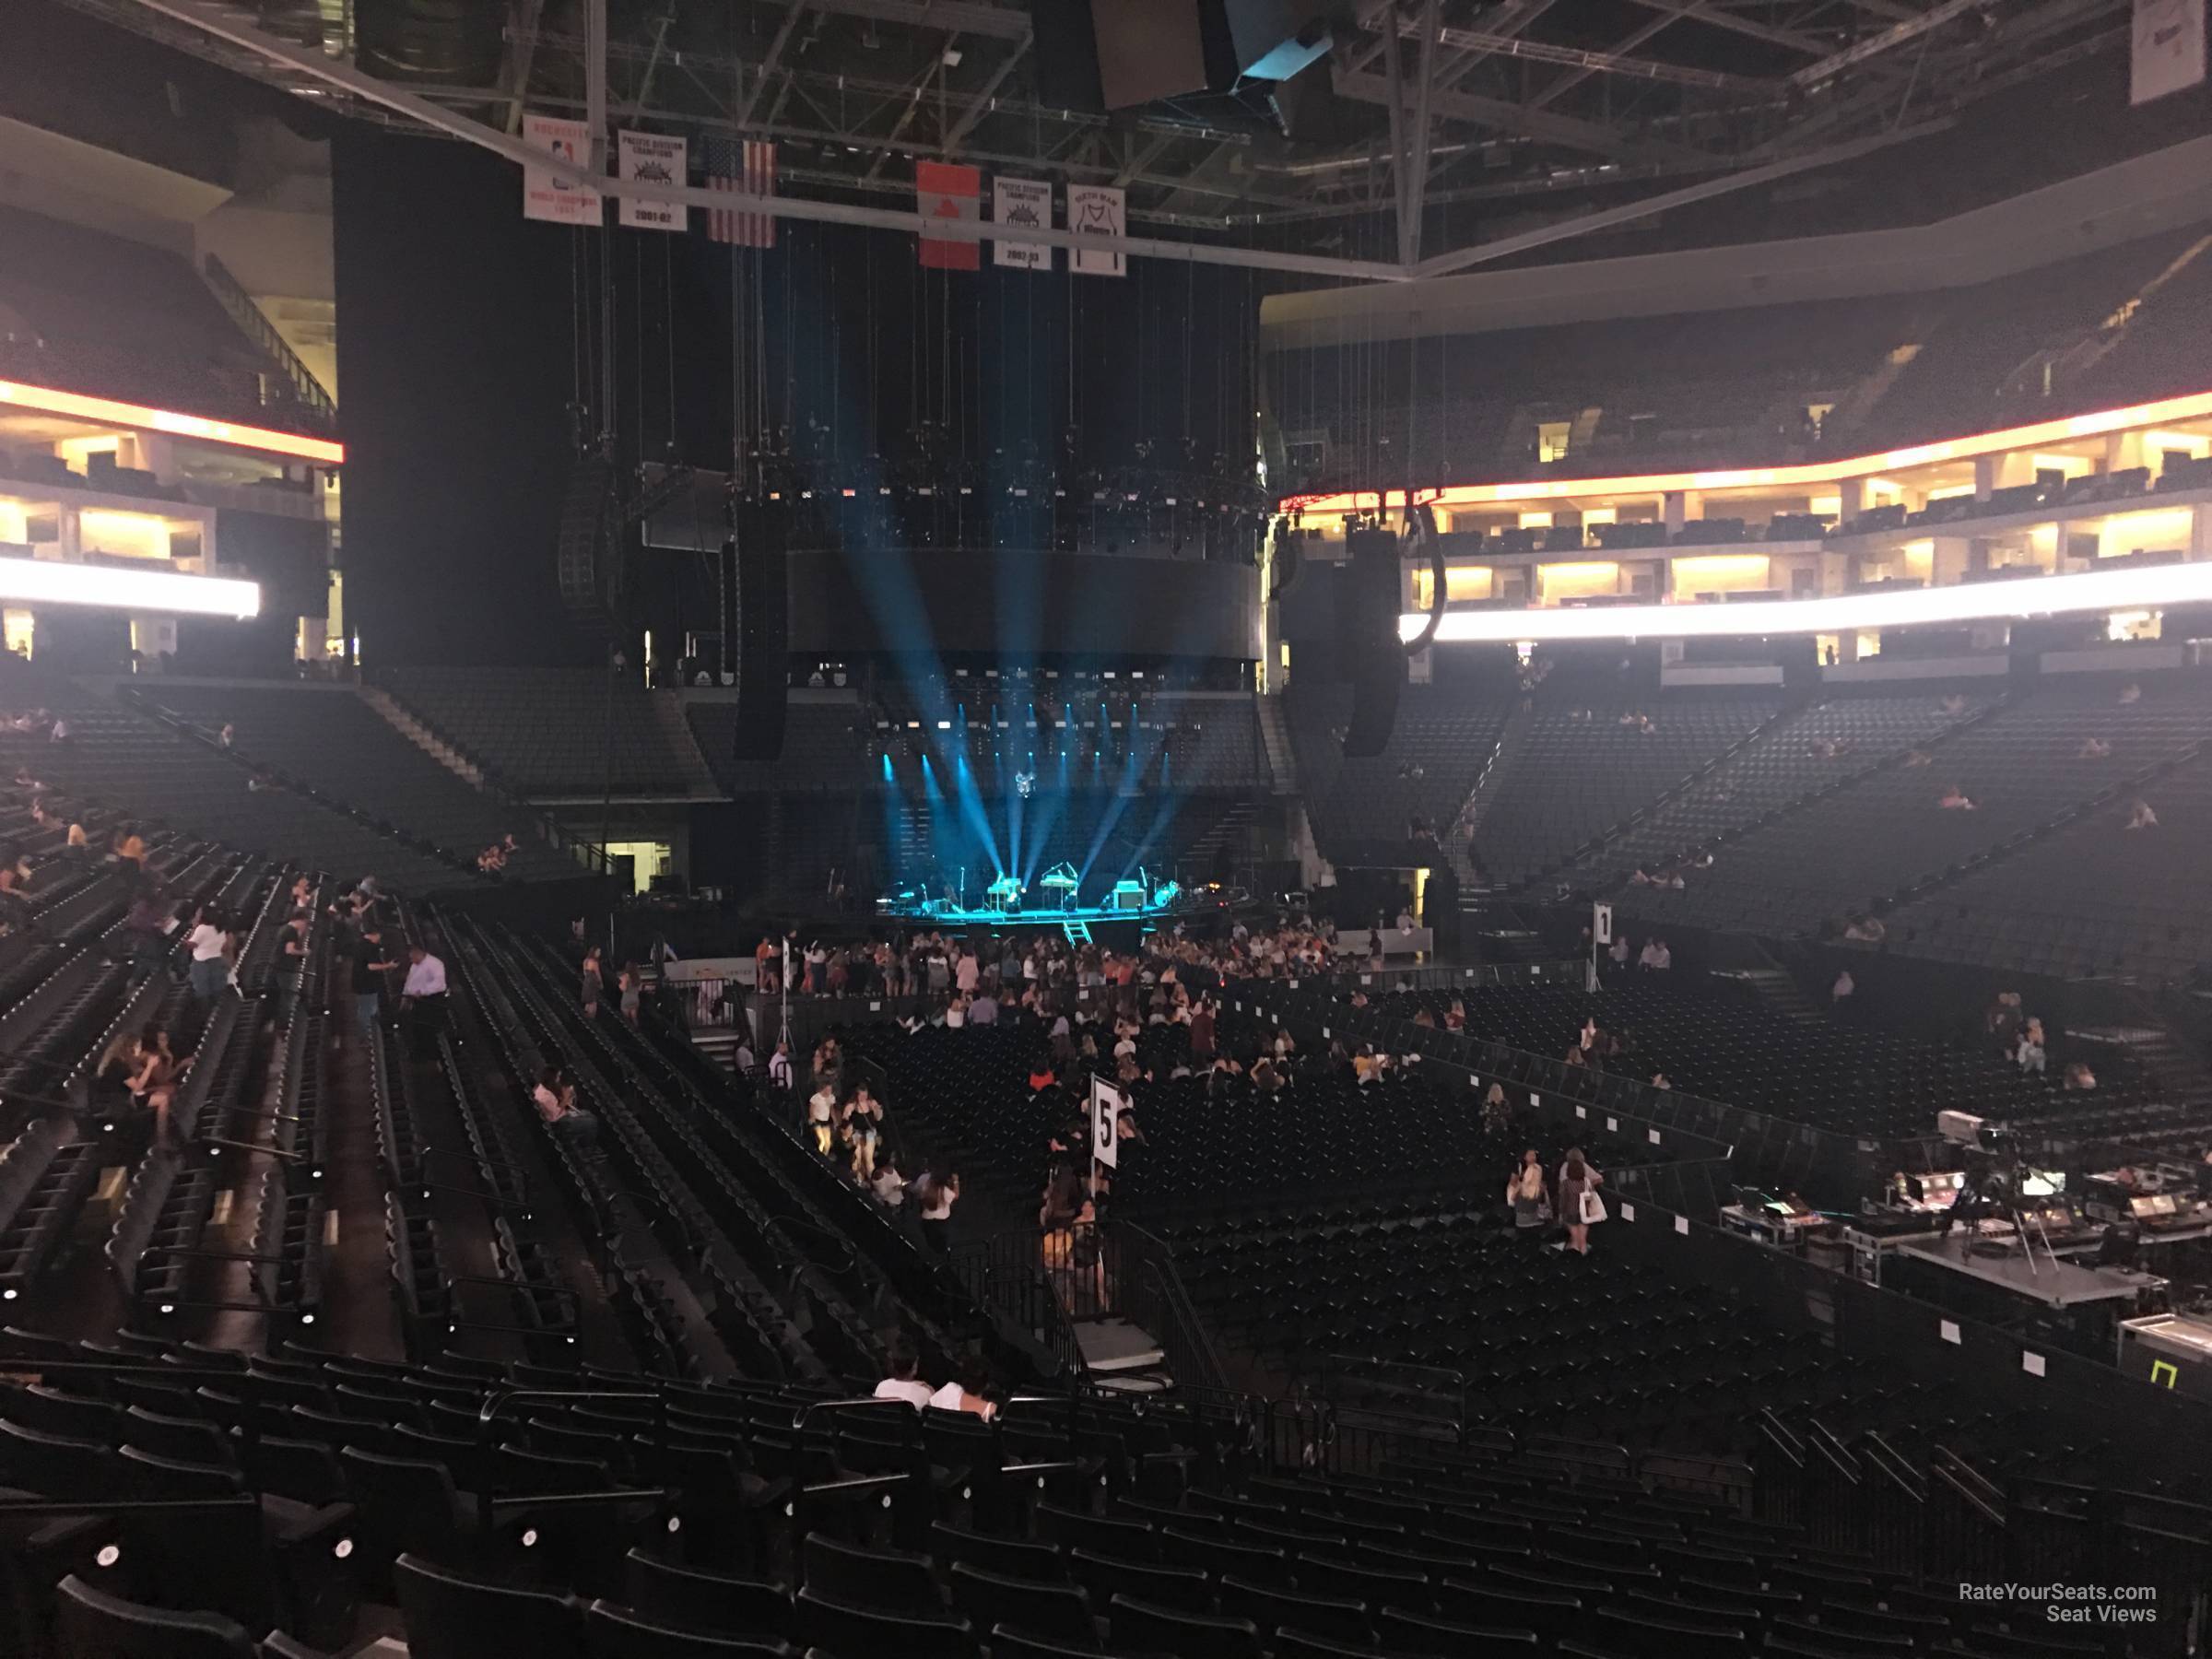 Golden One Center Seating Chart With Rows Matttroy